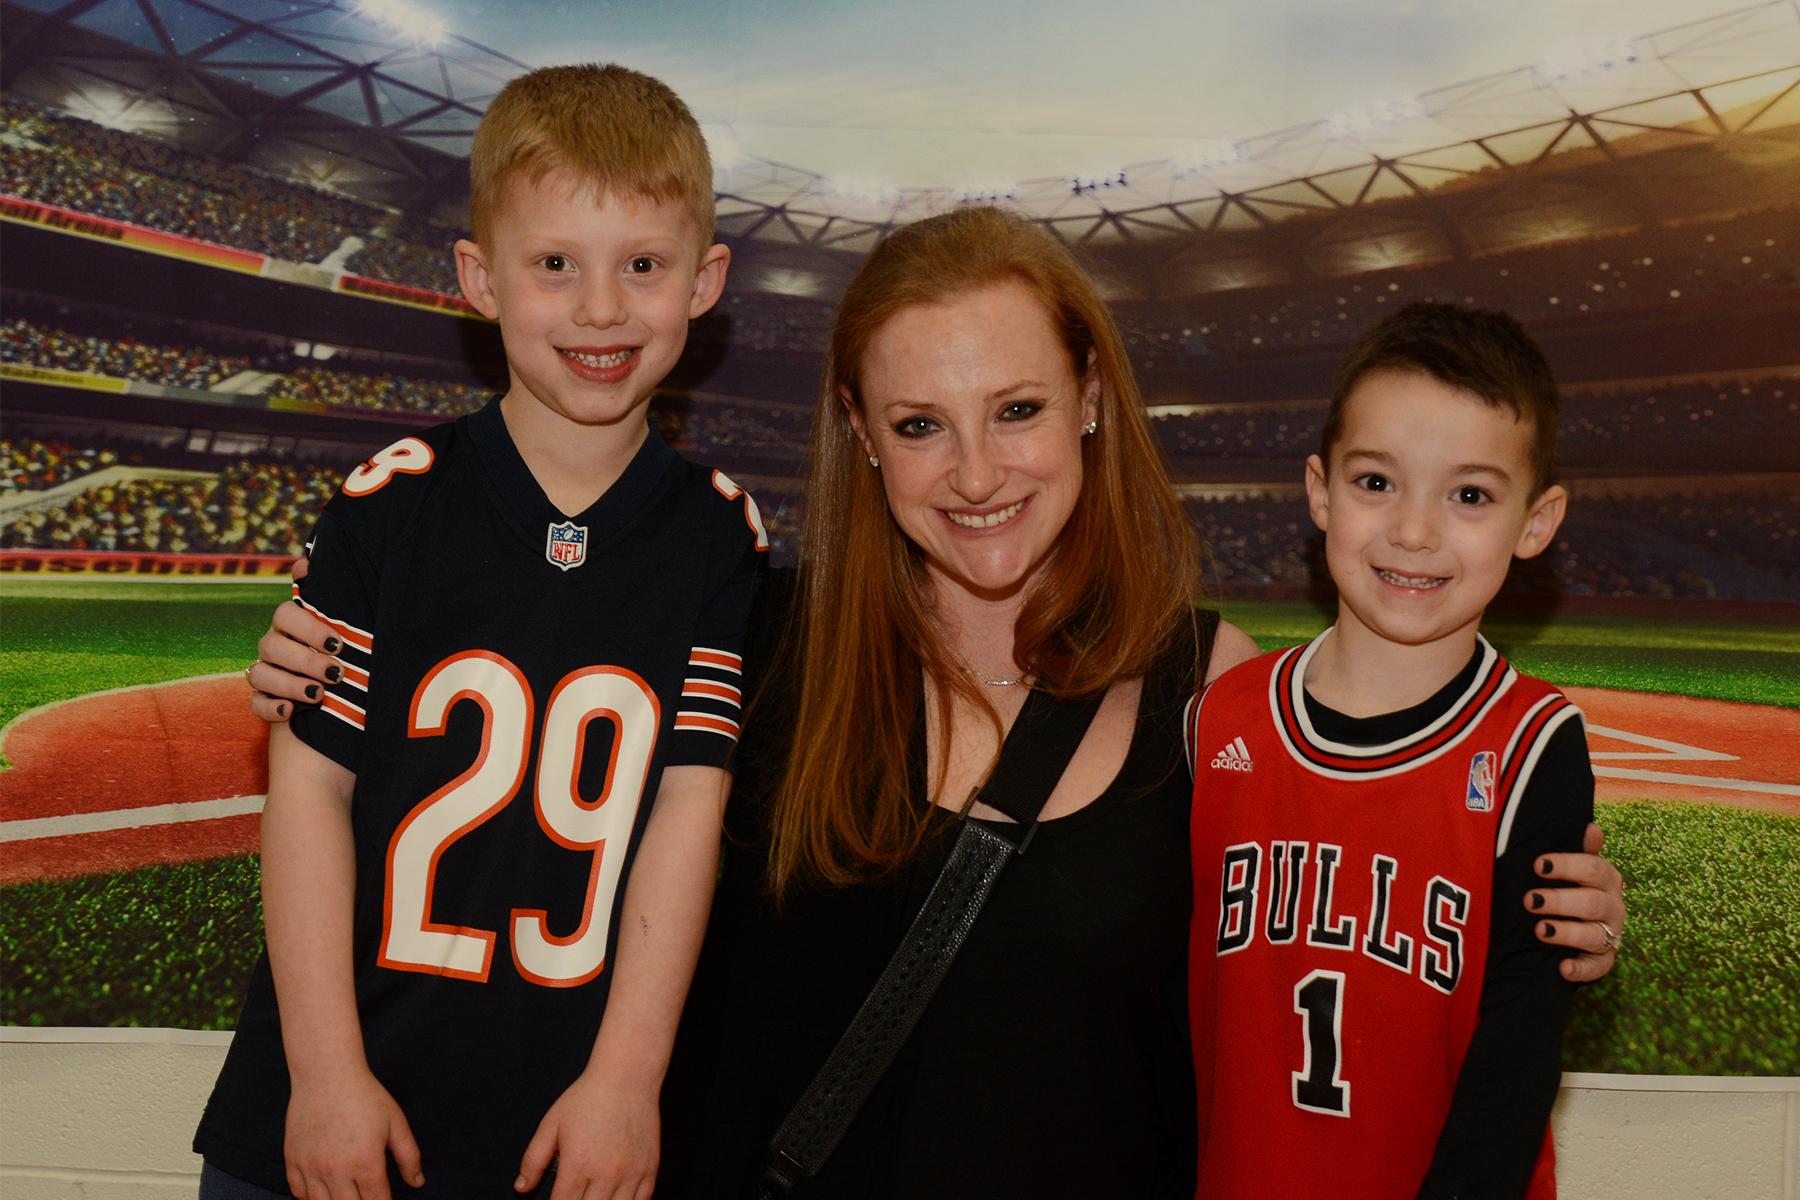 A woman and 2 kids wearing sports jersey's